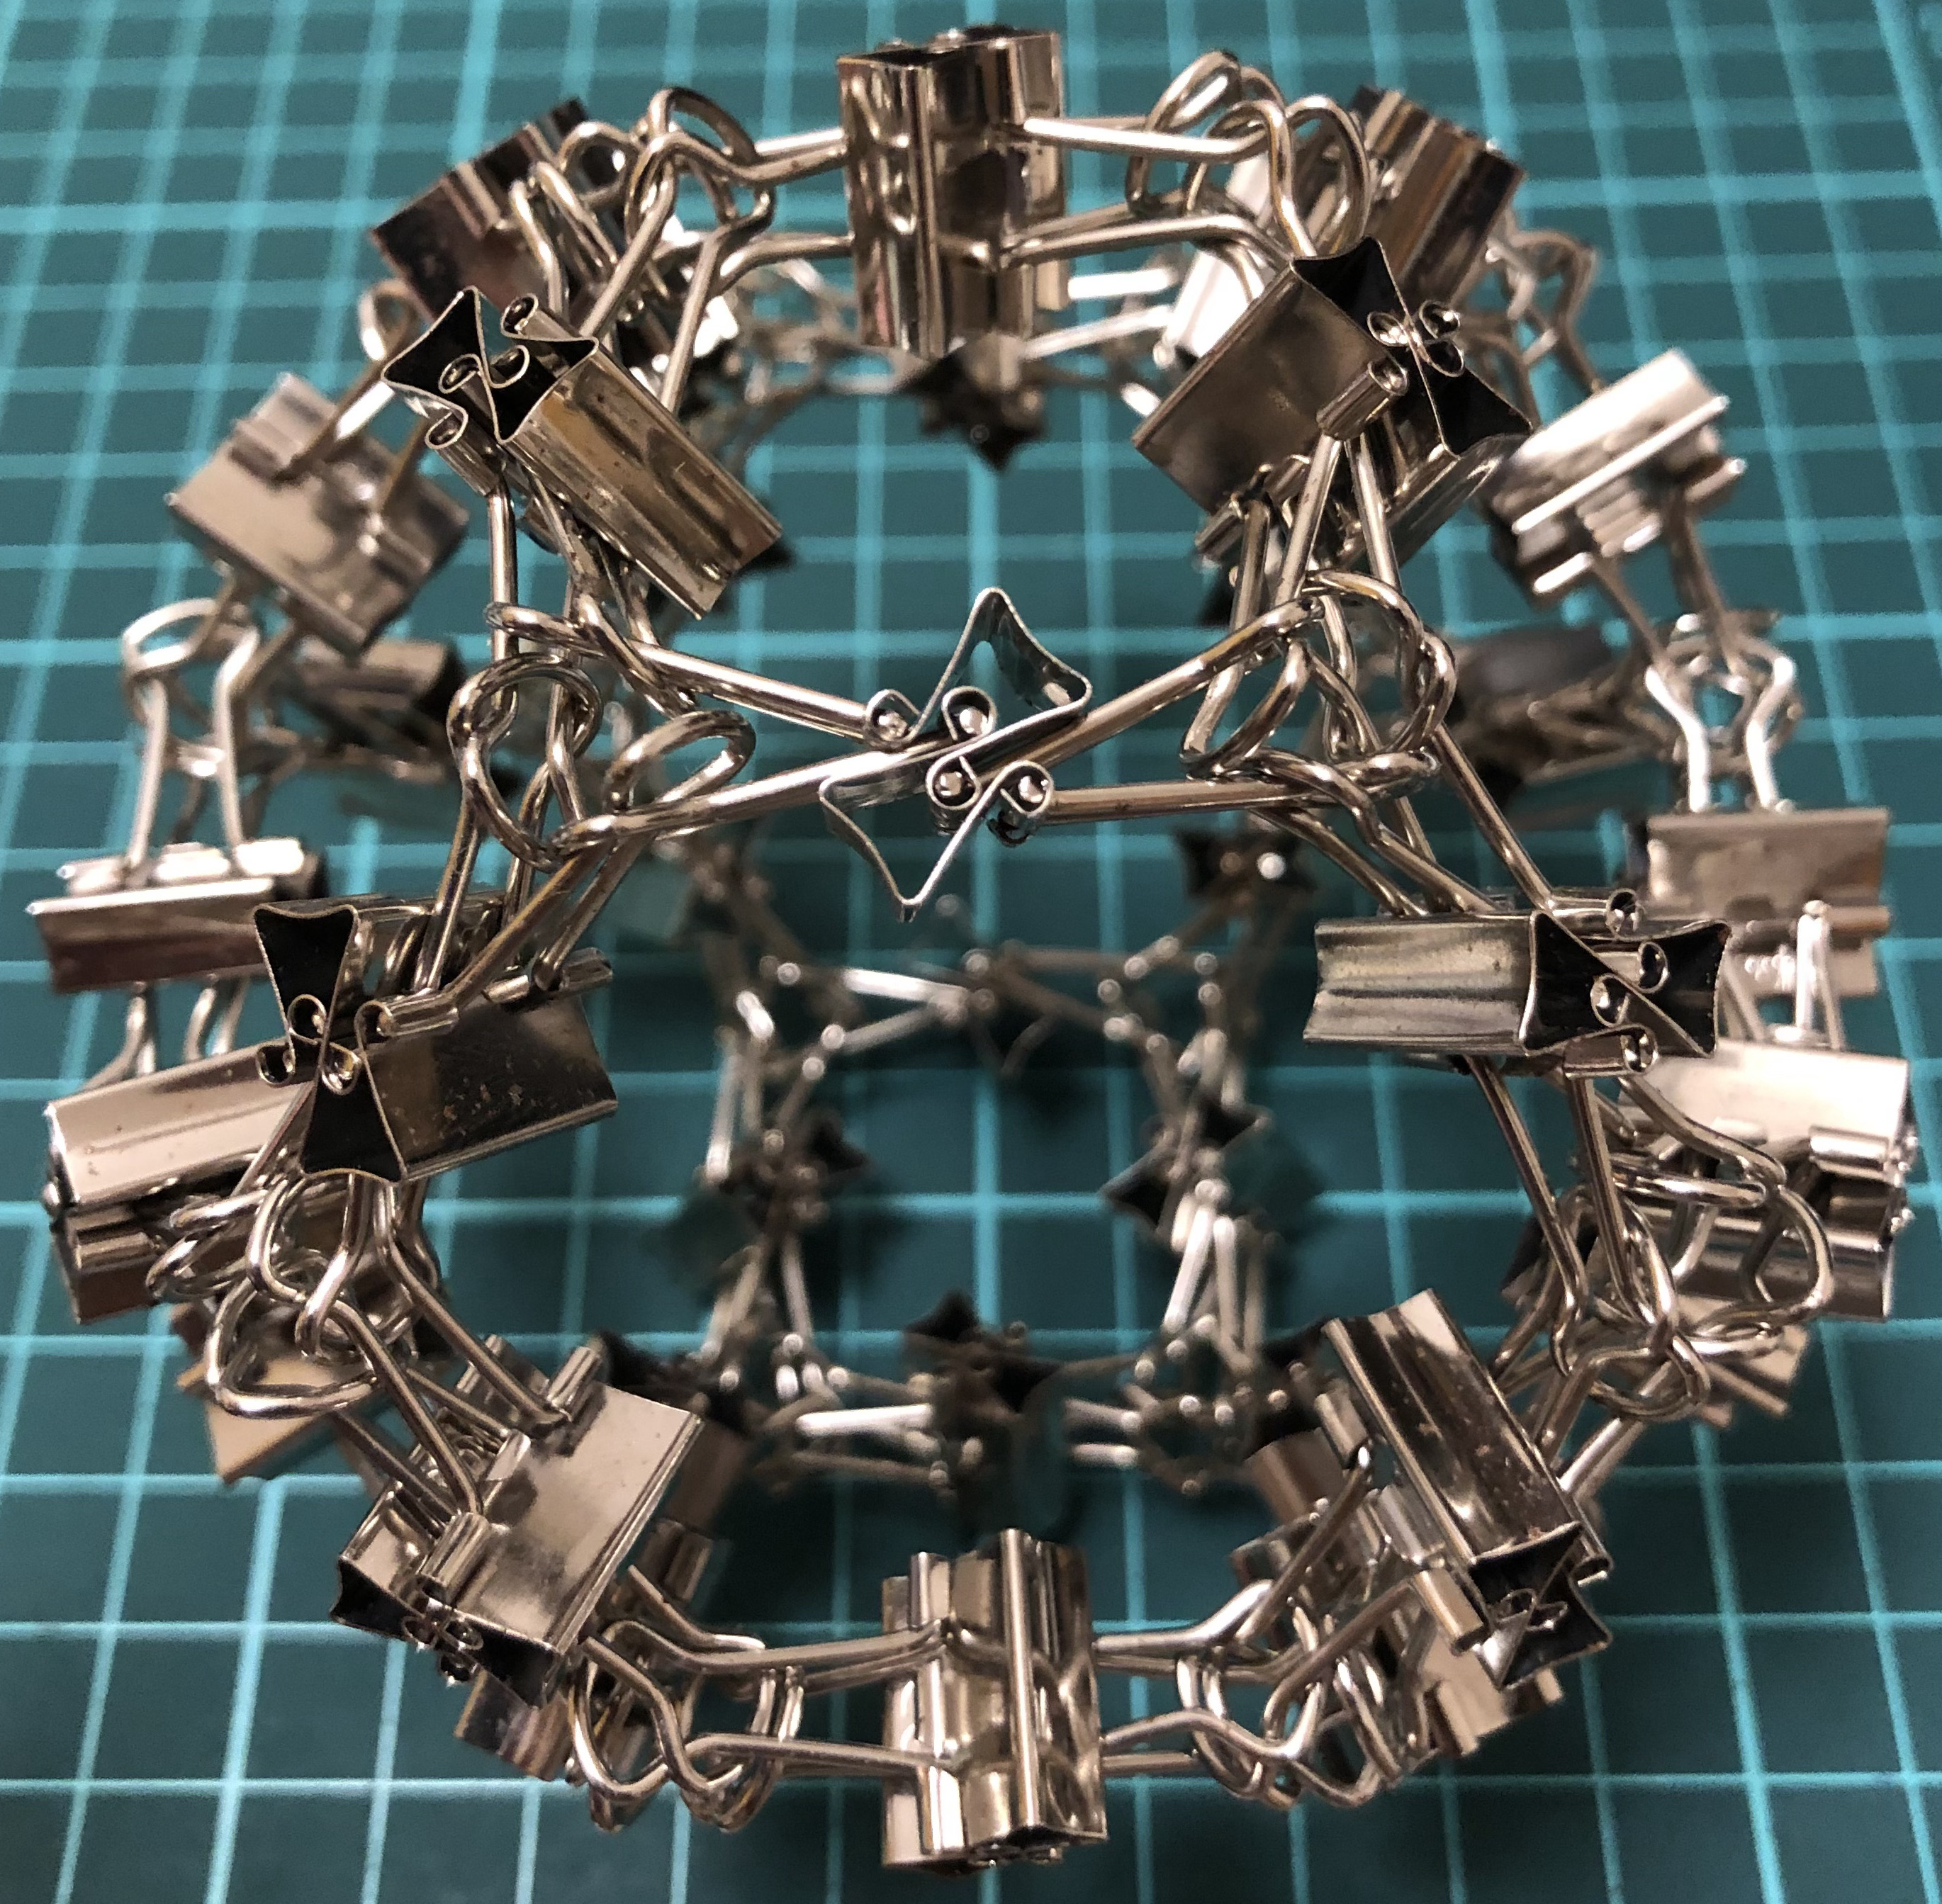 72 clips forming 36 I-edges forming truncated octahedron